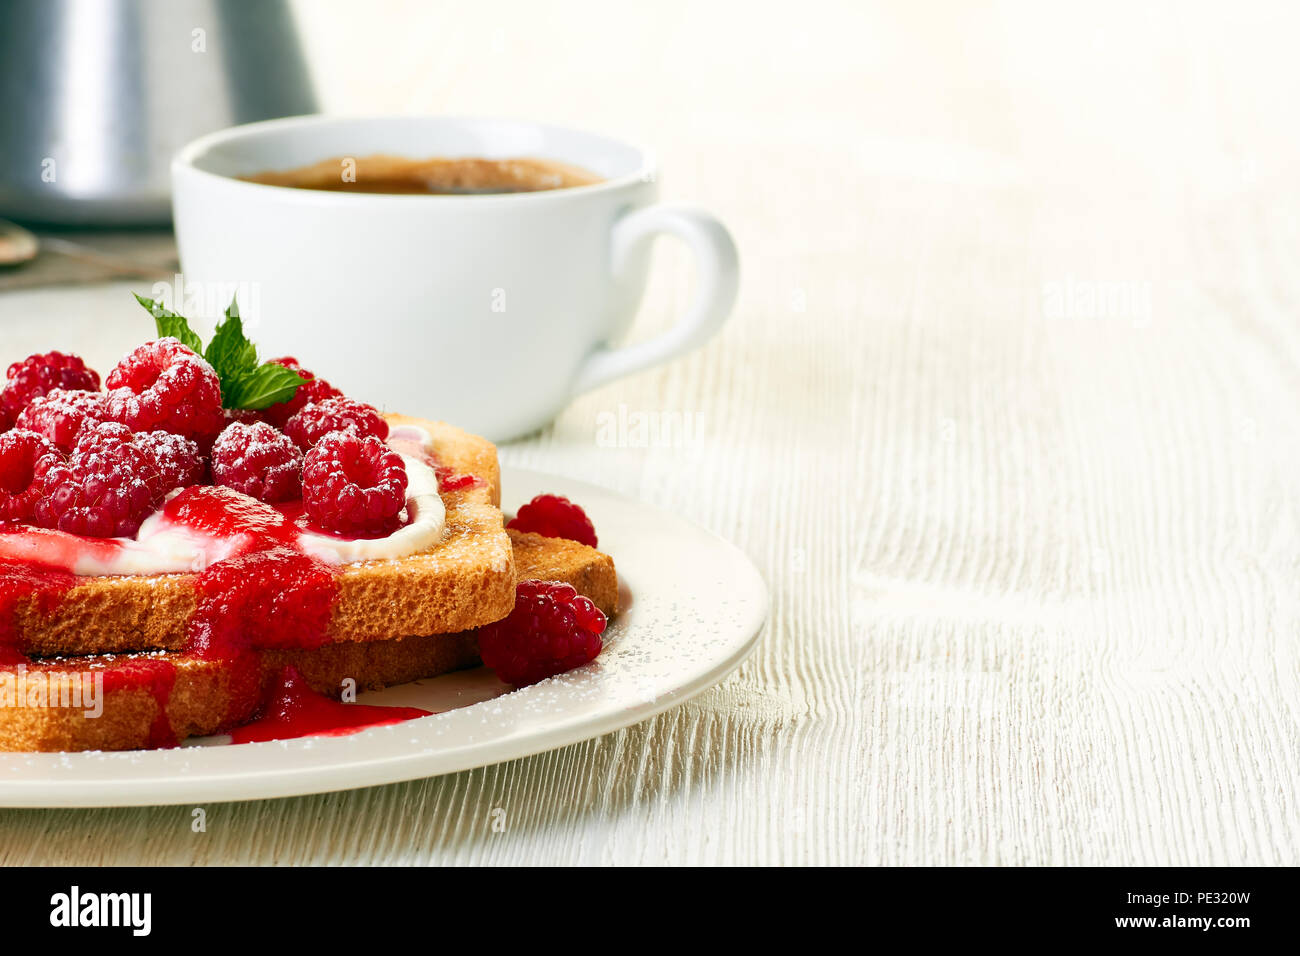 Coffee and toast with fresh raspberries on white table Stock Photo